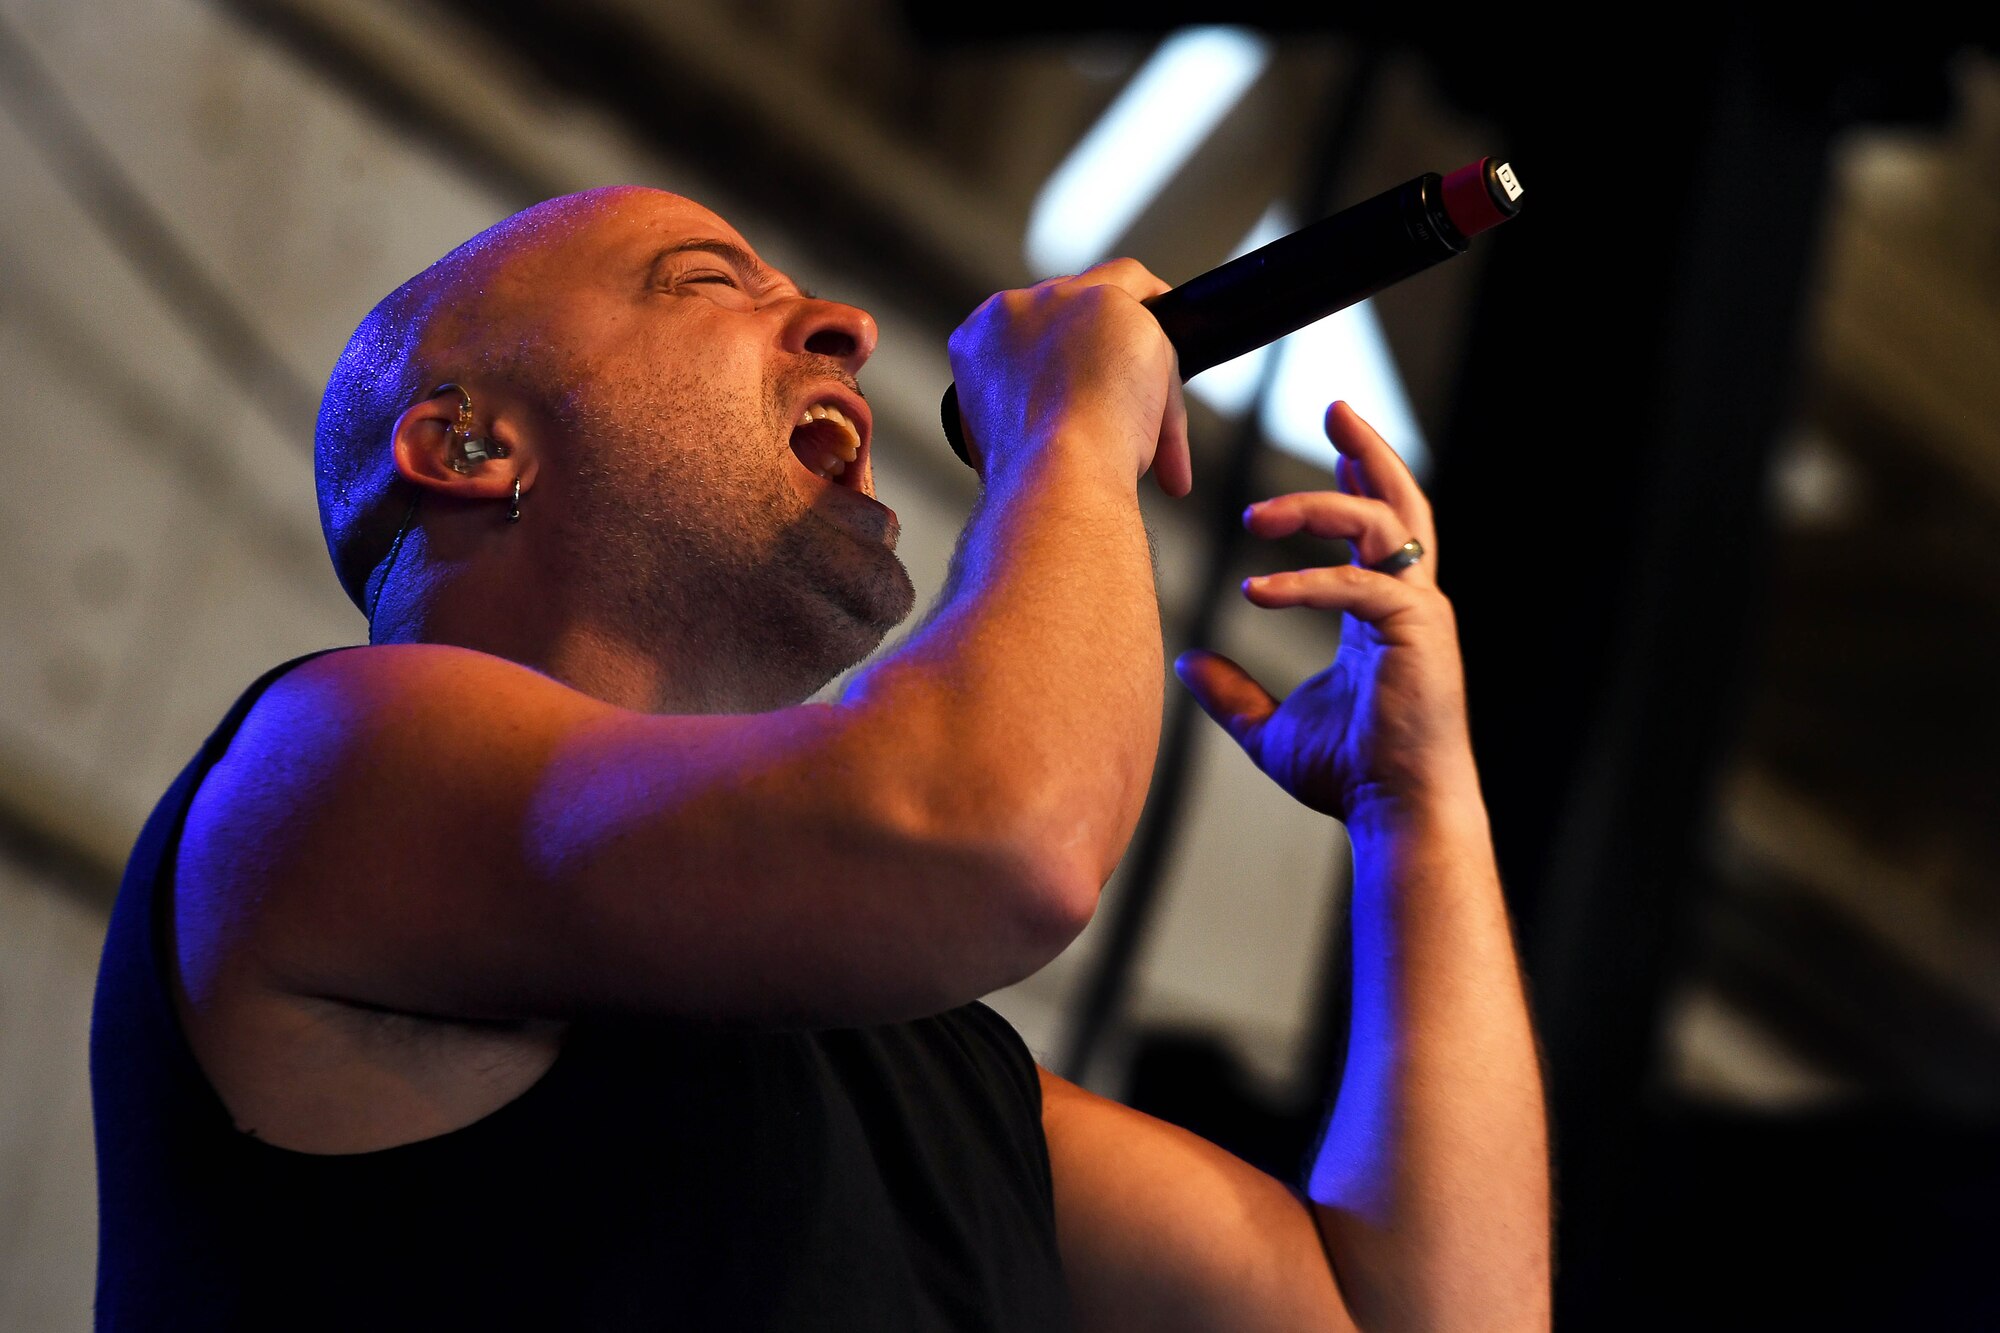 David Draiman, Disturbed lead vocalist, performs for Creech Air Force Base Airmen Oct. 23, 2018. Disturbed partnered with the USO to perform a concert for Creech Airmen after learning about the wing mission. (U.S. Air Force photo by James Thompson)